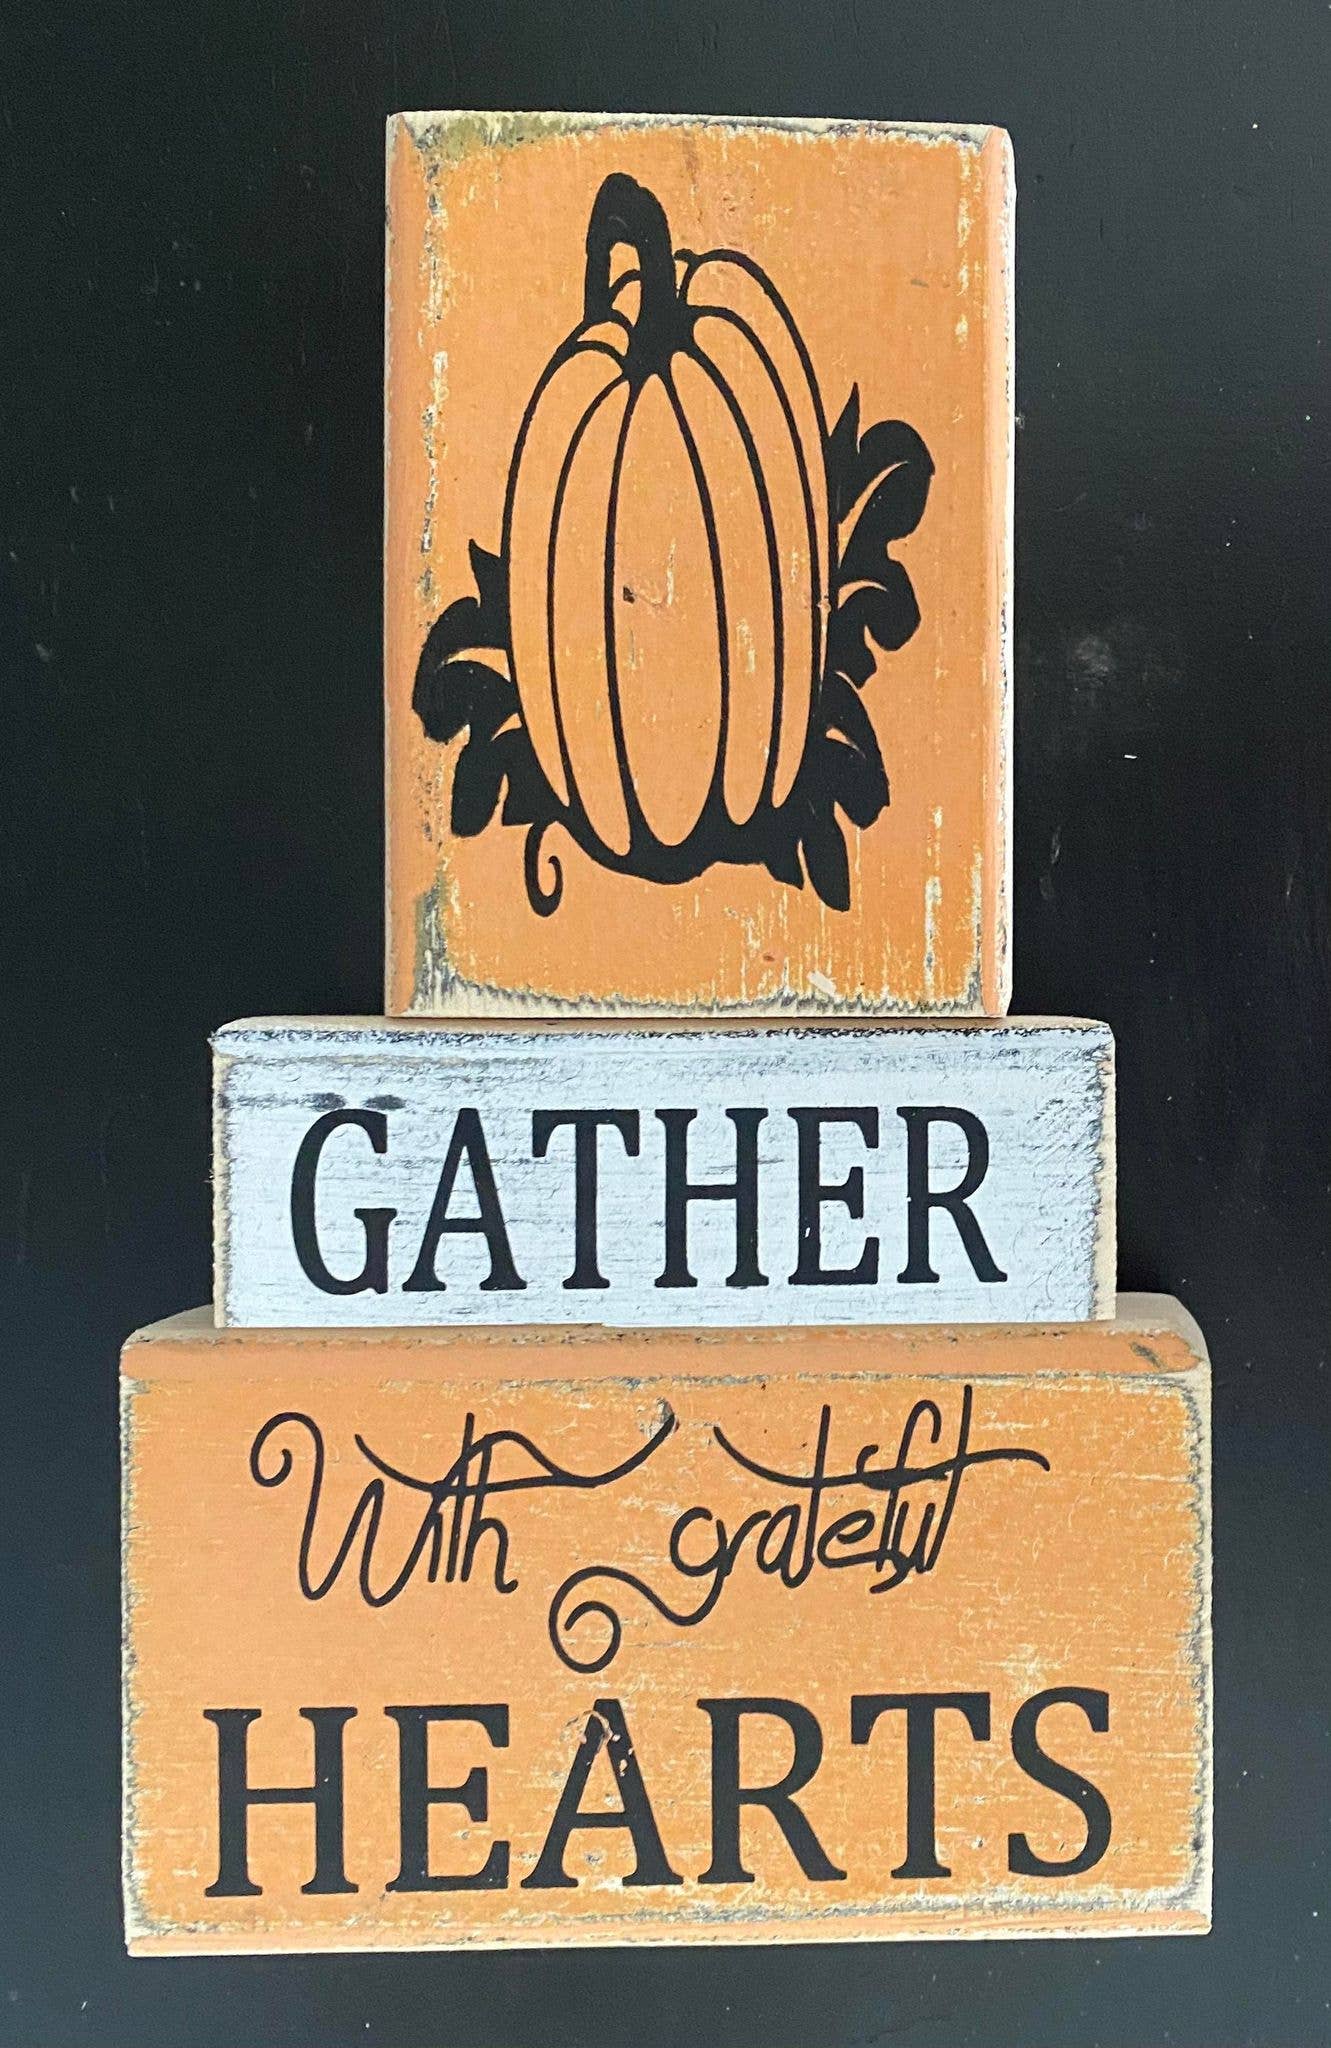 GATHER WITH GRATEFUL HEARTS